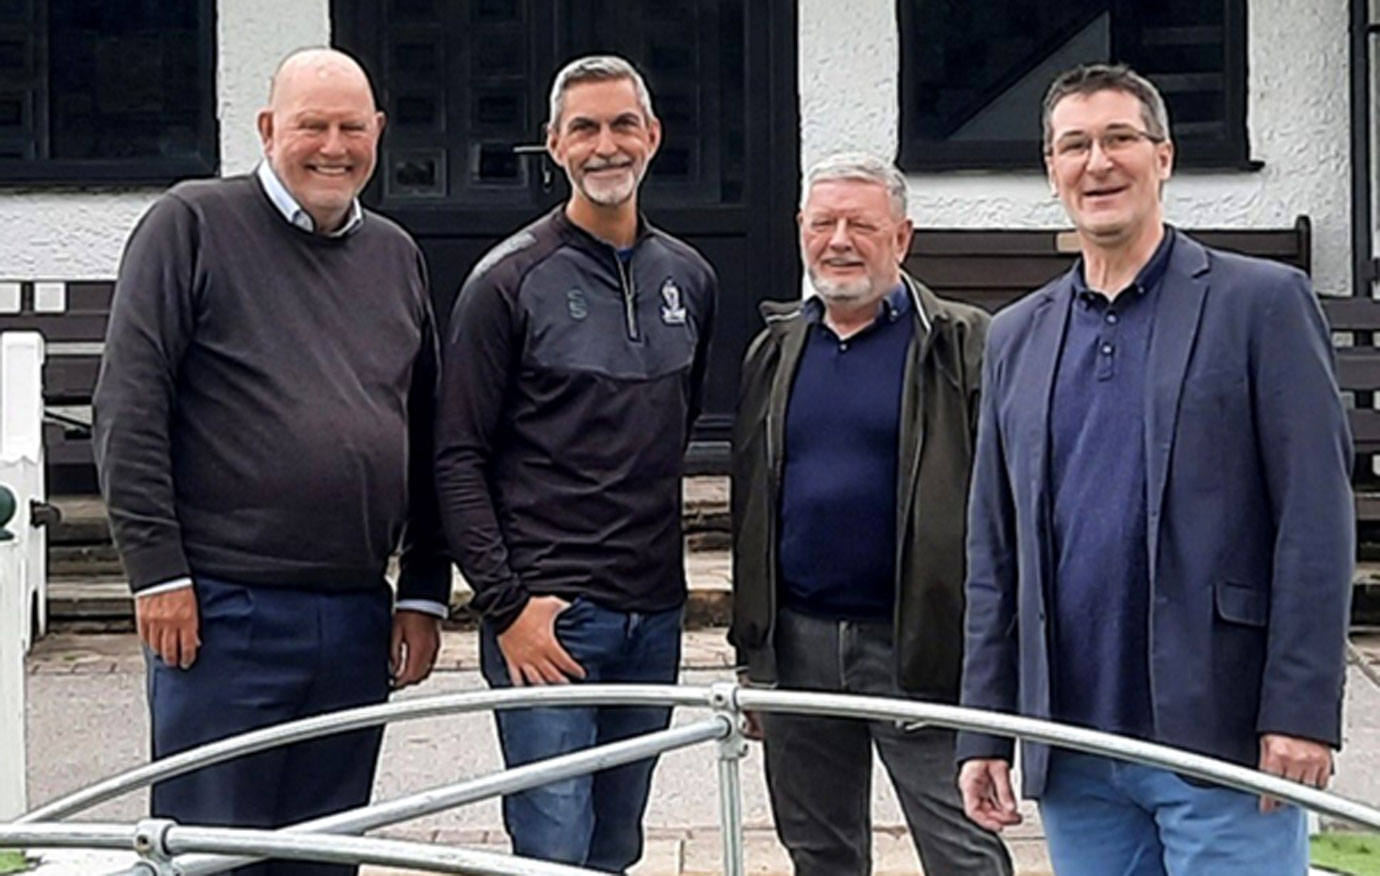 Pictured from left to right, are: Graham Fish, Mark Sutch, John Anderson and Andy Sumner.